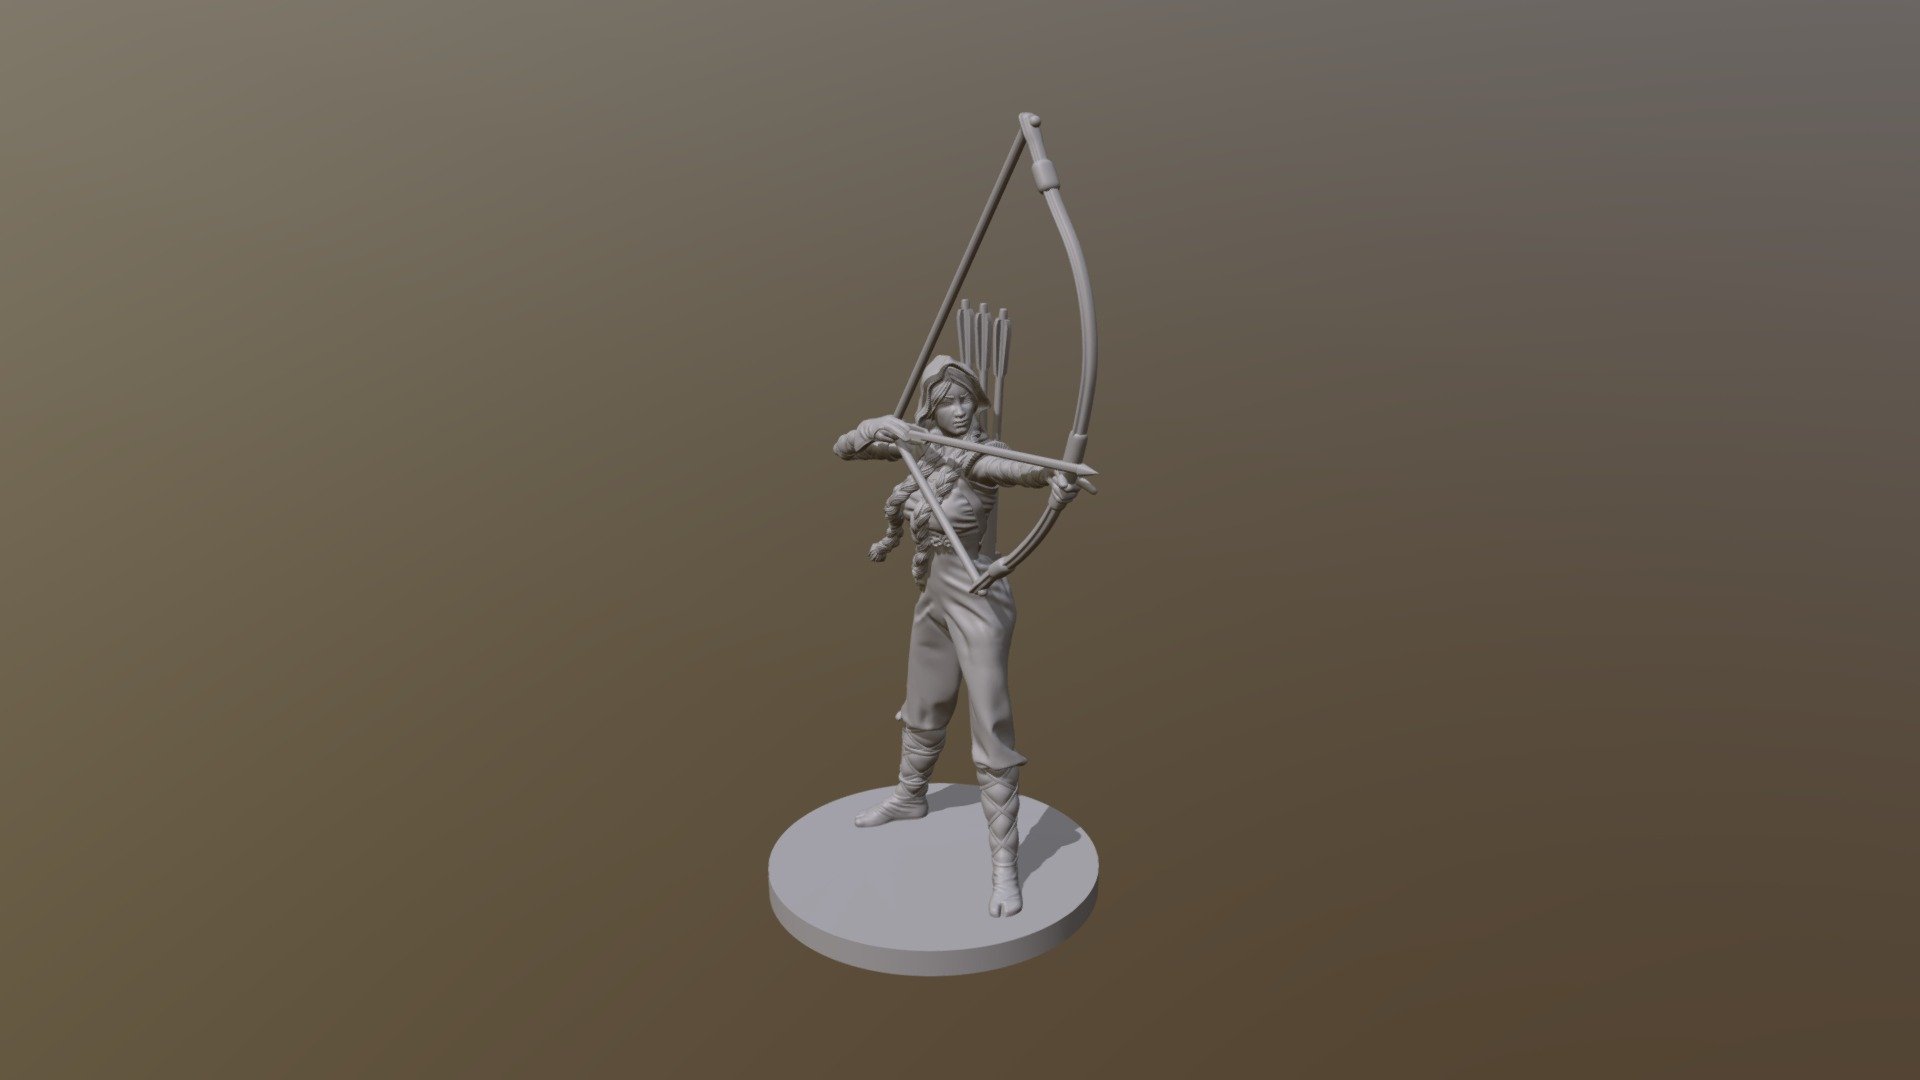 Ninja Aiko miniature model for Shadow Tactics board game by Antler Games.

This is the alternate version of Aiko. Originally in the game she is disguised as a geisha, with mainly distracting skills. But in her ninja clothing she can use her full capacity of sneaking ang killing - with a powerful ranged weapon too.

Learn more at: https://antlergames.com/shadowtactics/ - Ninja Aiko - Shadow Tactics board game miniature - 3D model by antlergames 3d model